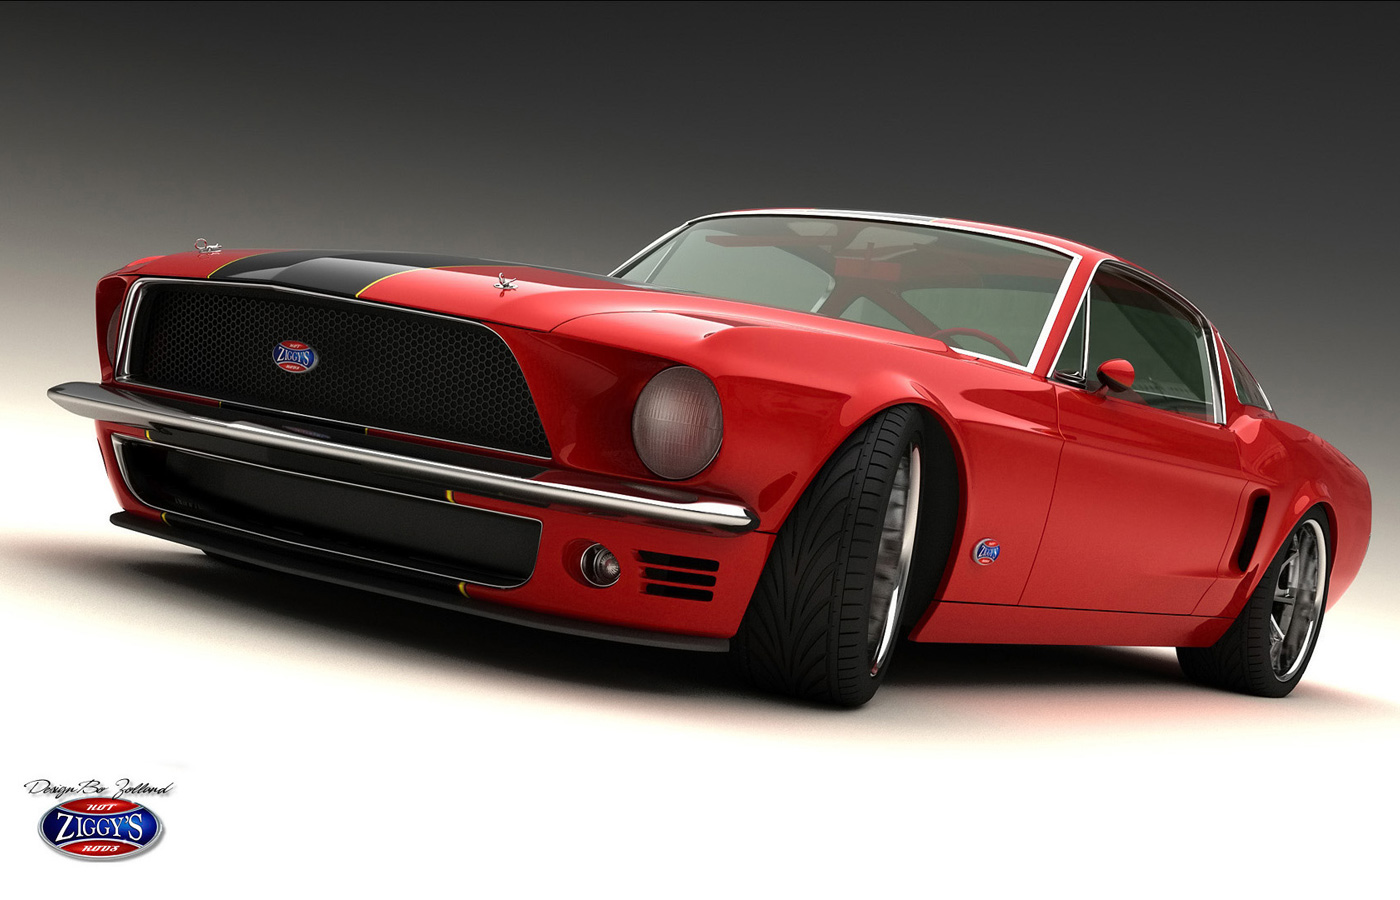 Classic Mustang Fastback wallpaper   Classic Mustang Fastback by